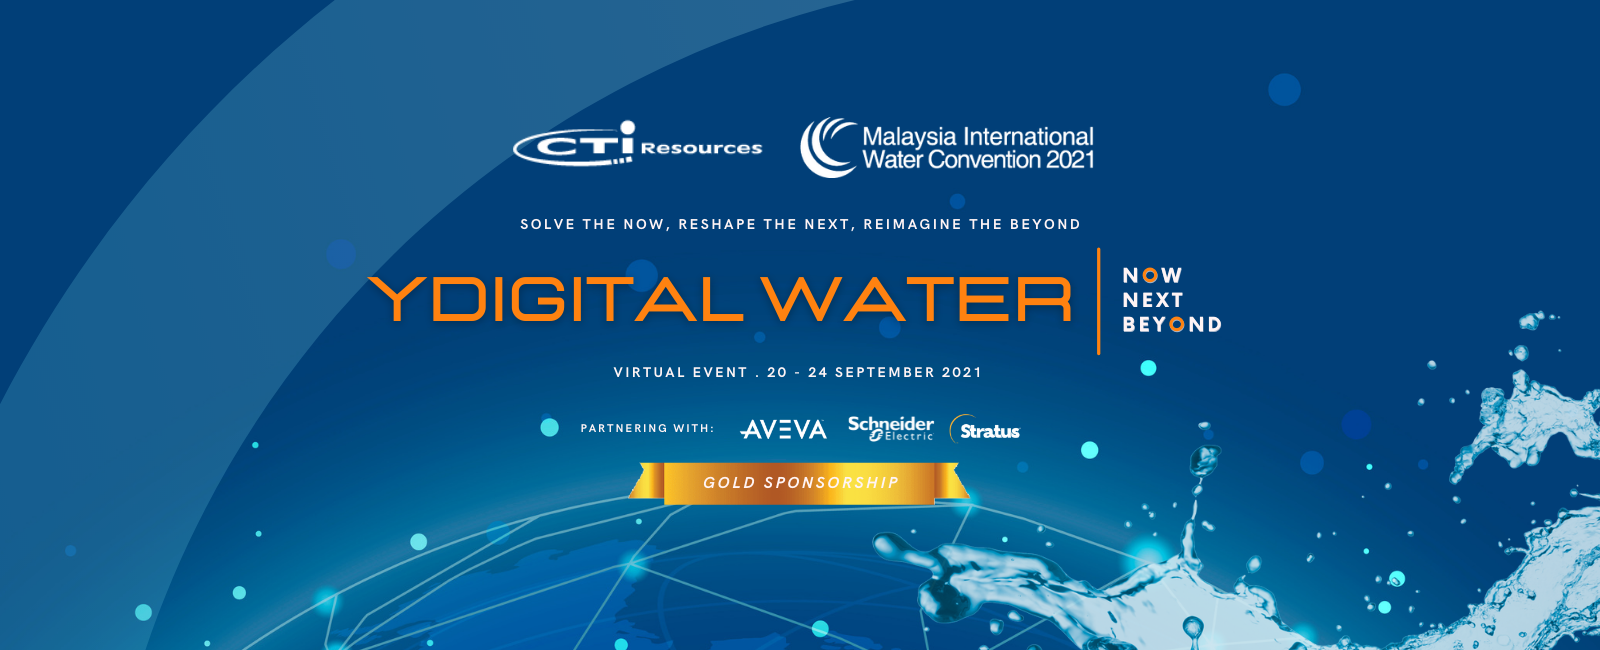 Thank You for joining Malaysia International Water Convention 2021!